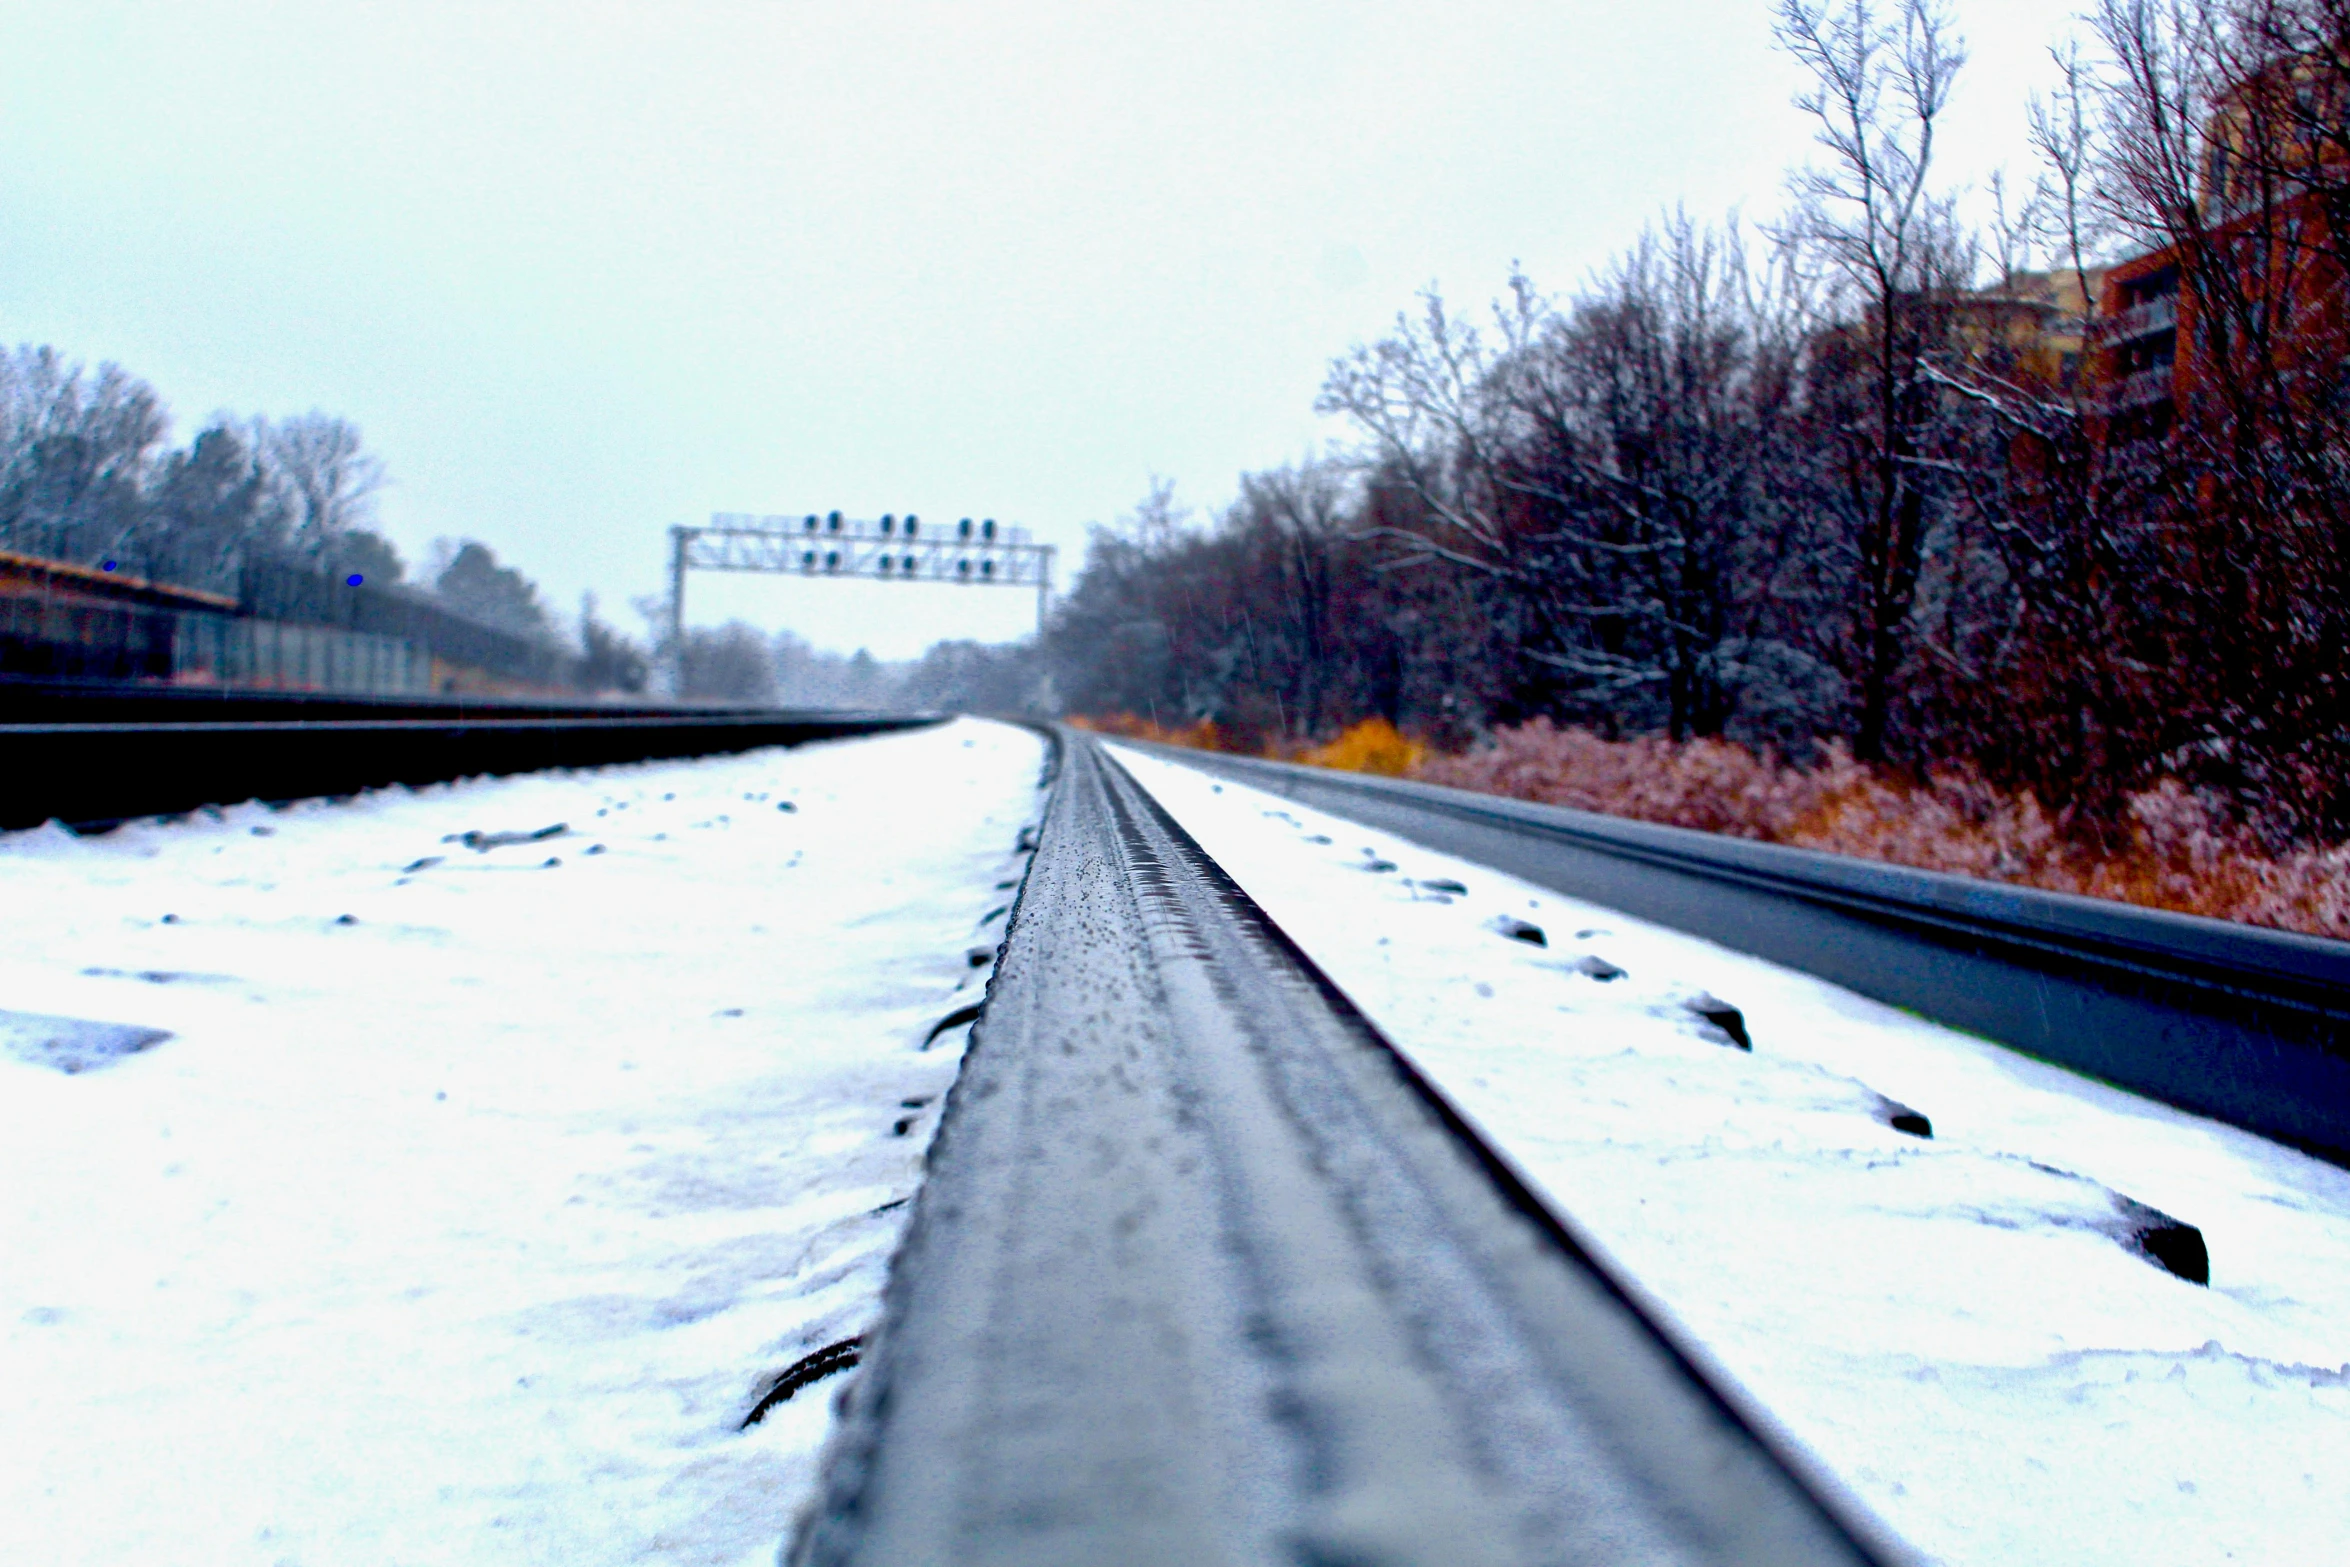 the long train tracks are empty as snow begins to grow